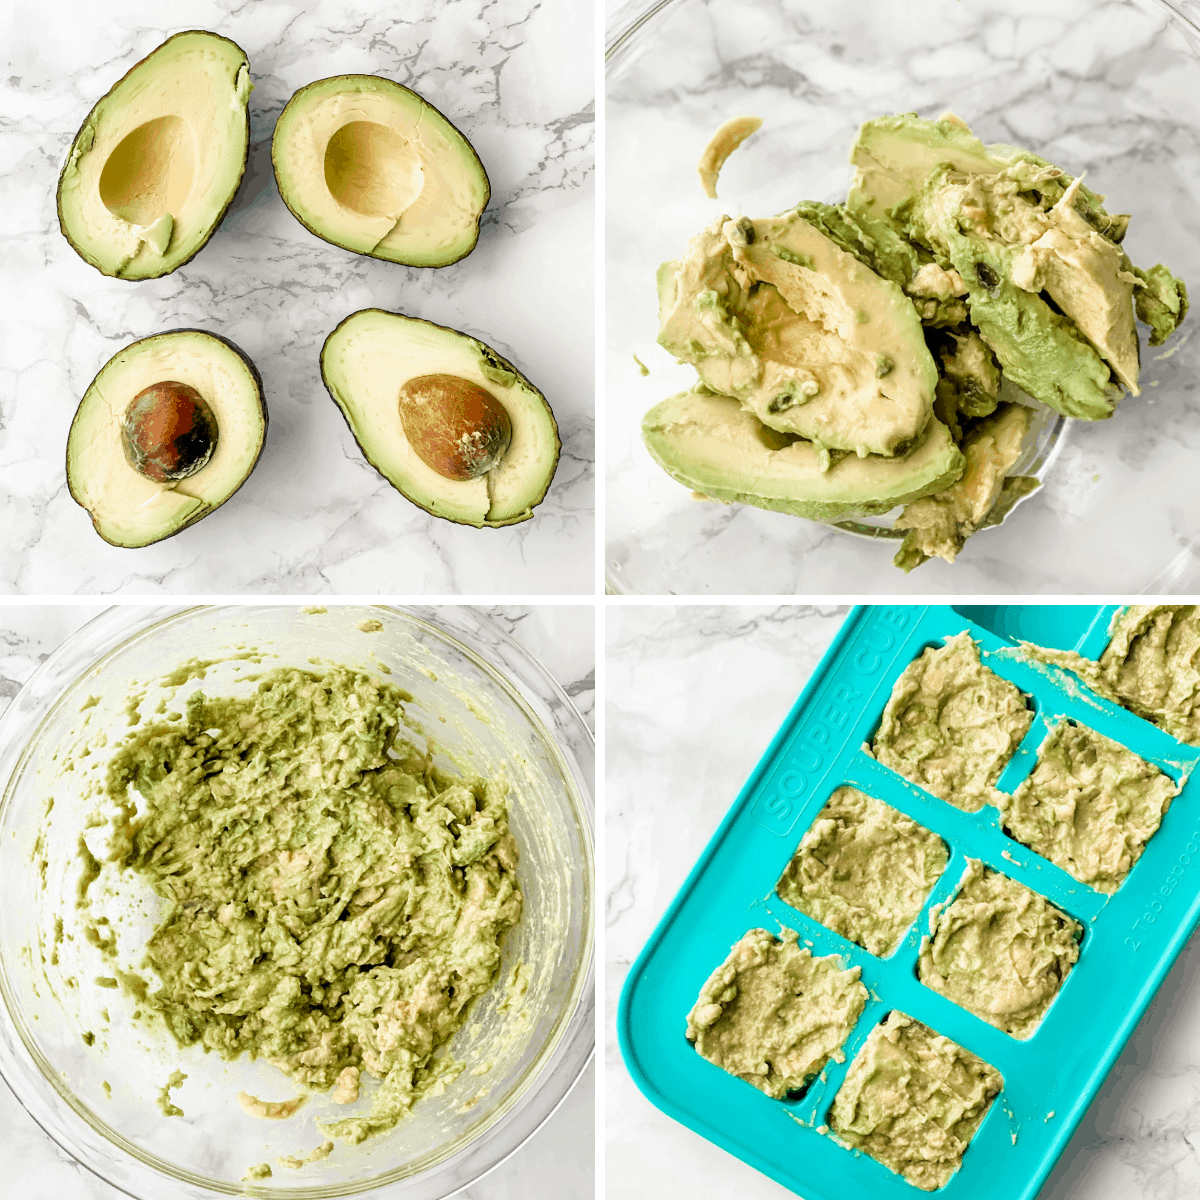 step by step how to freeze mashed avocado using silicone trays.